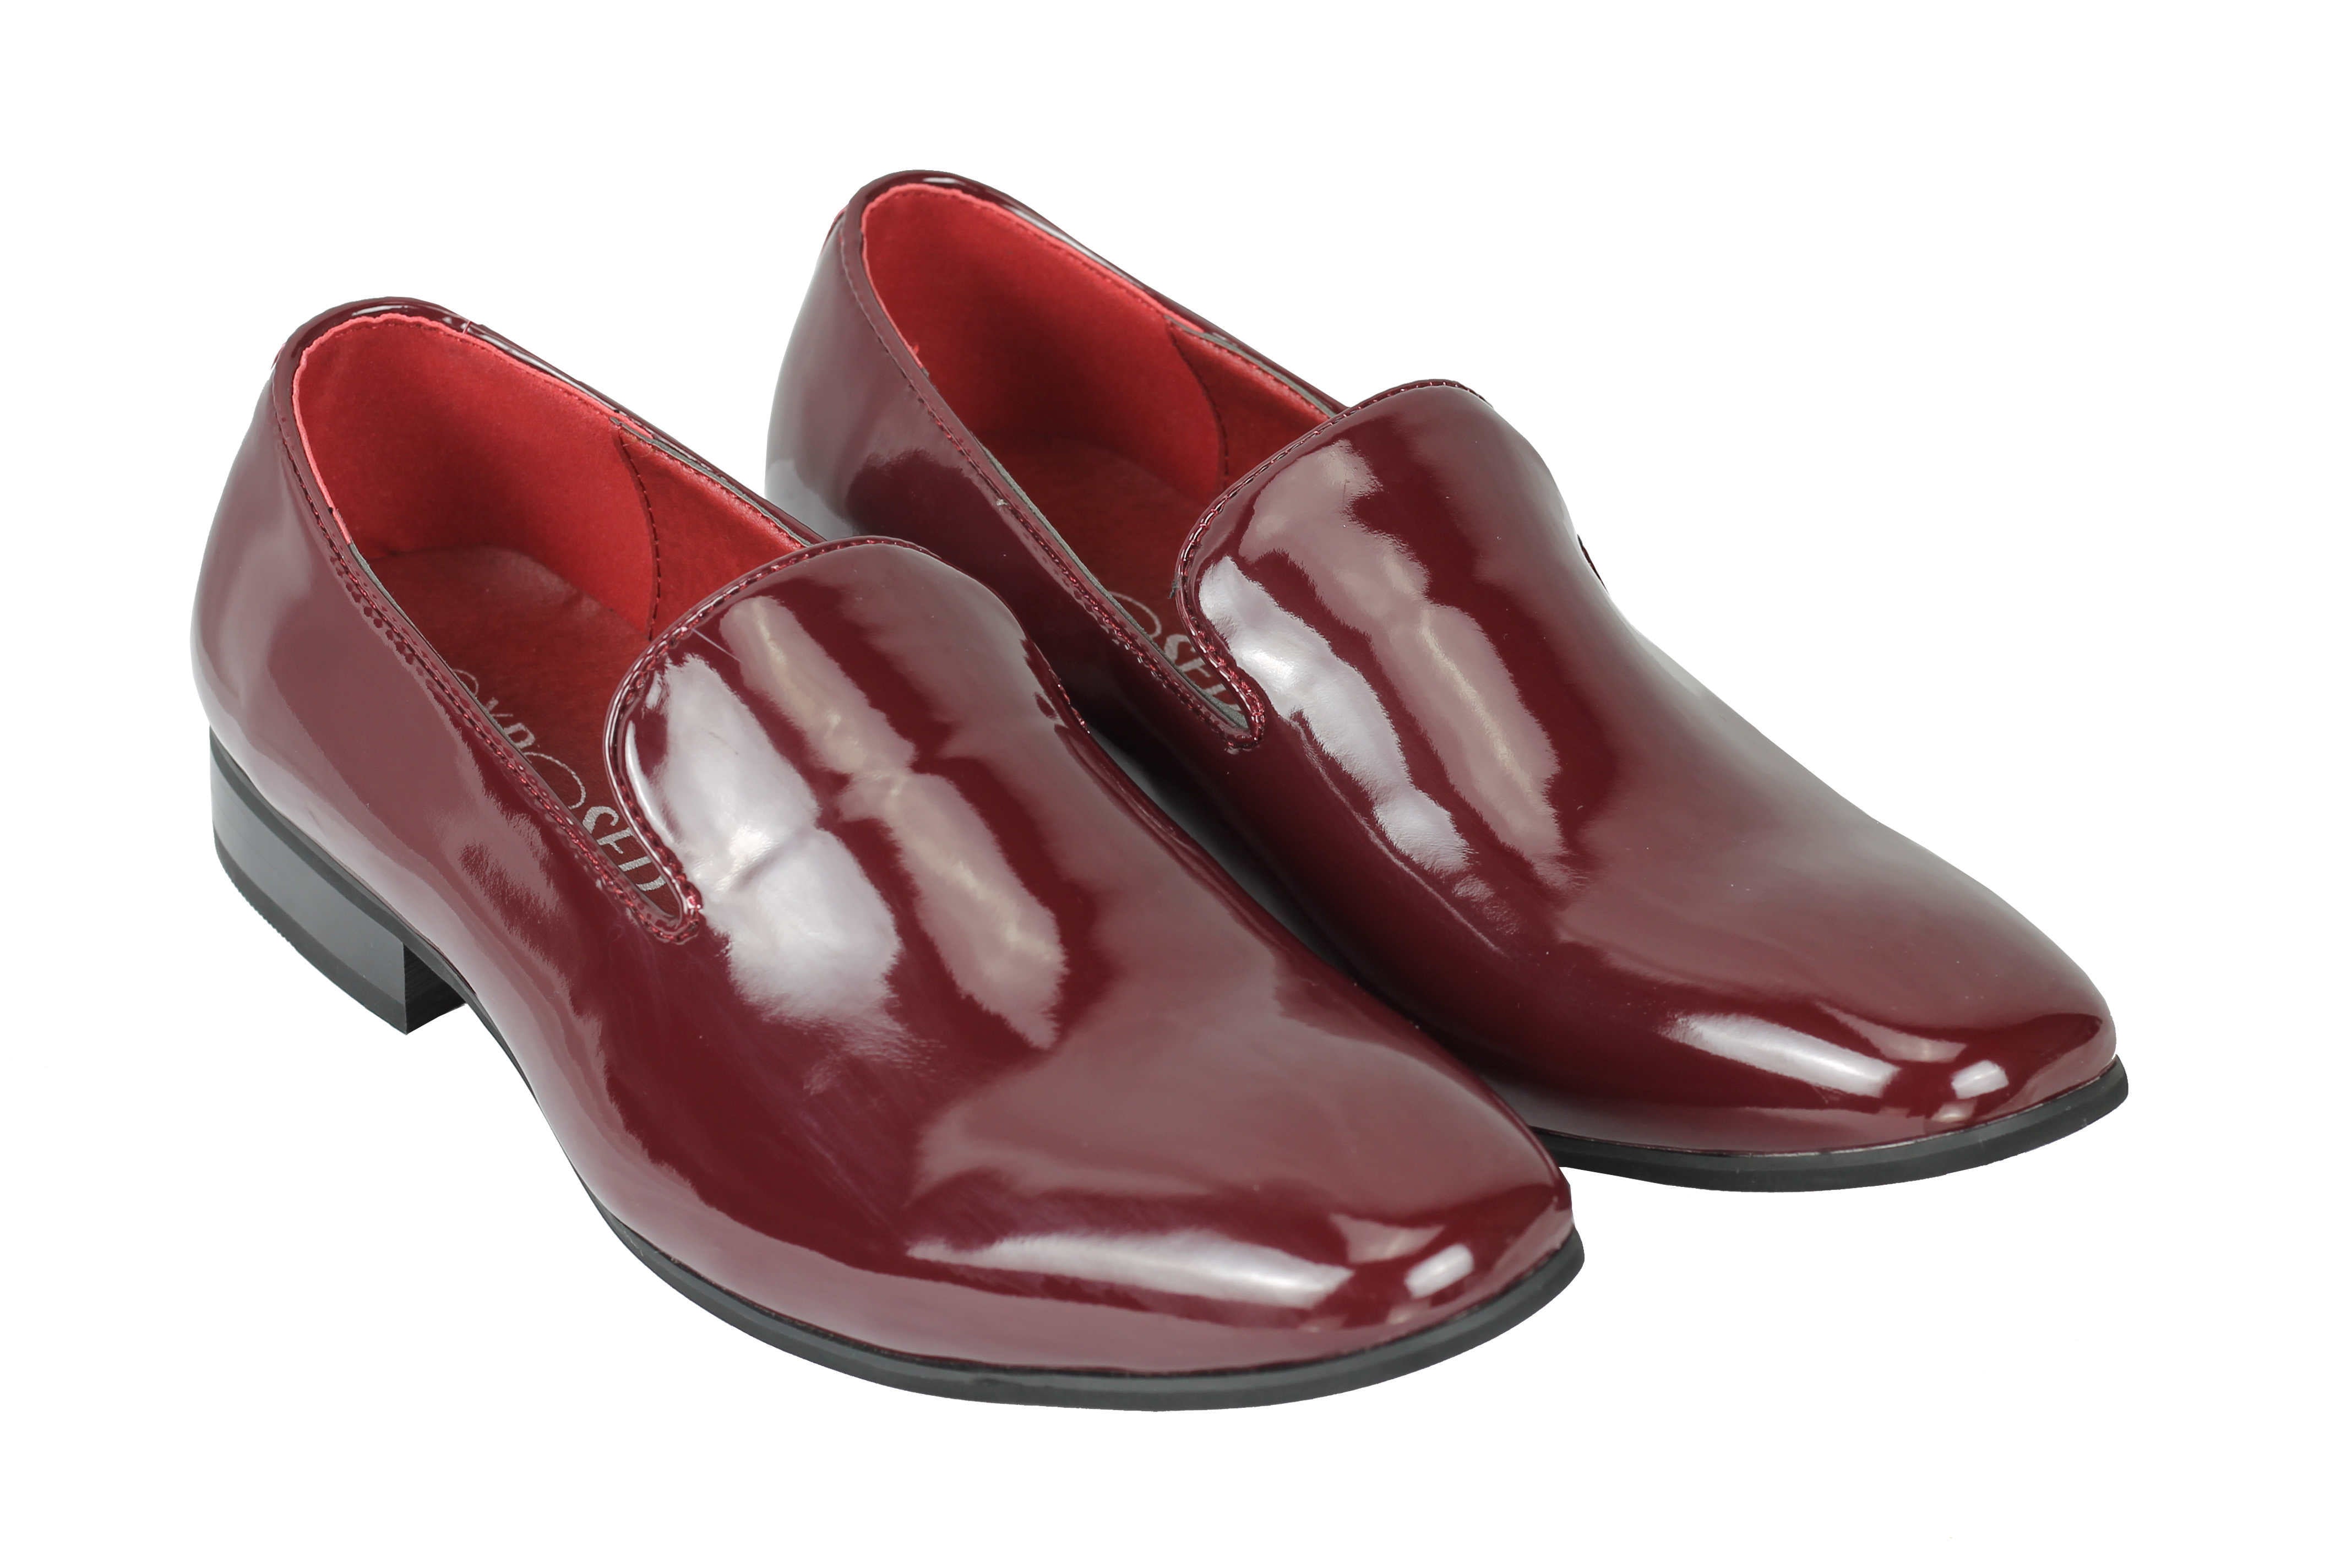 Faux Patent Leather Shiny Slip On Shoes In Maroon